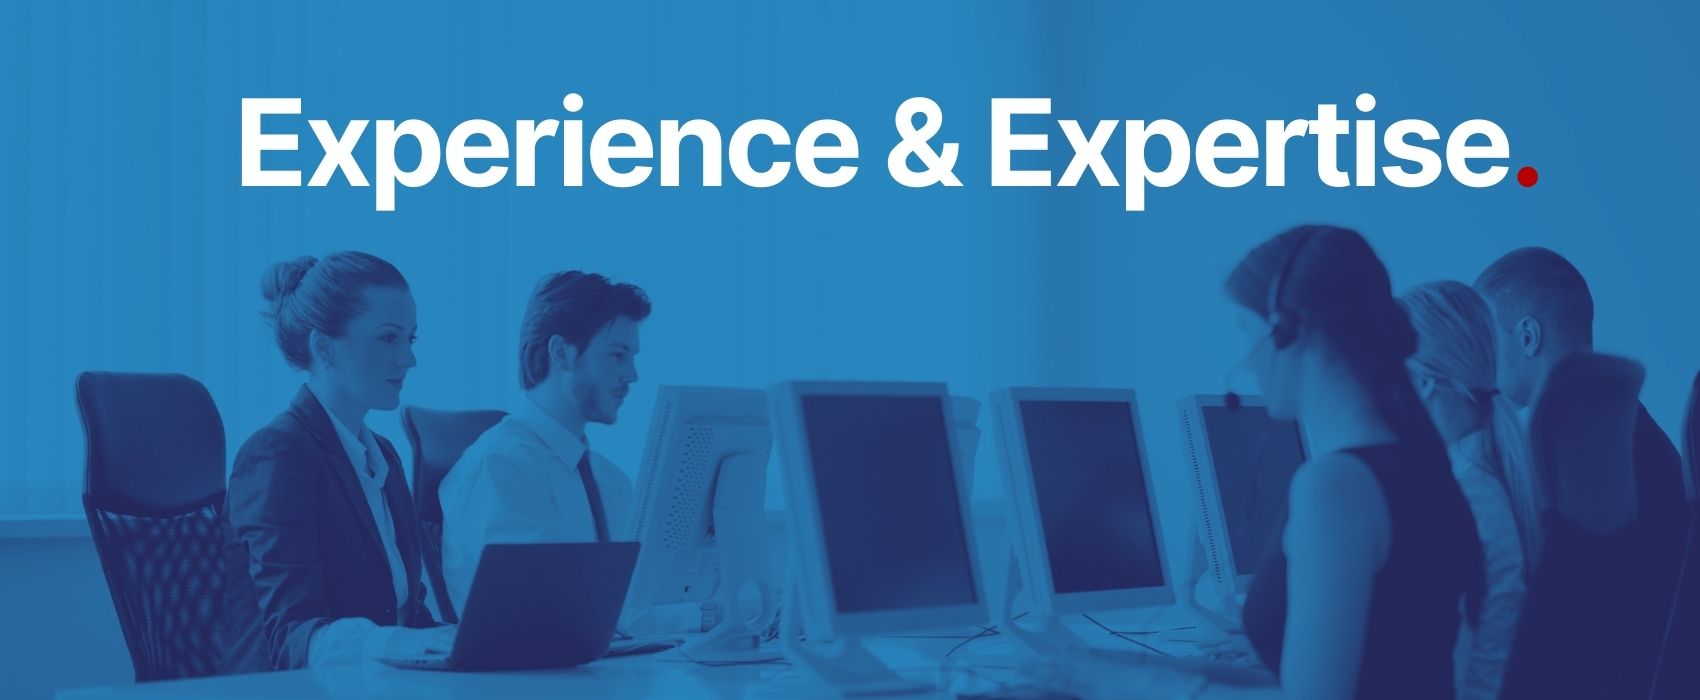 Experience & Expertise (1000 x 400 px) (1700 x 400 px) (1700 x 700 px)-2